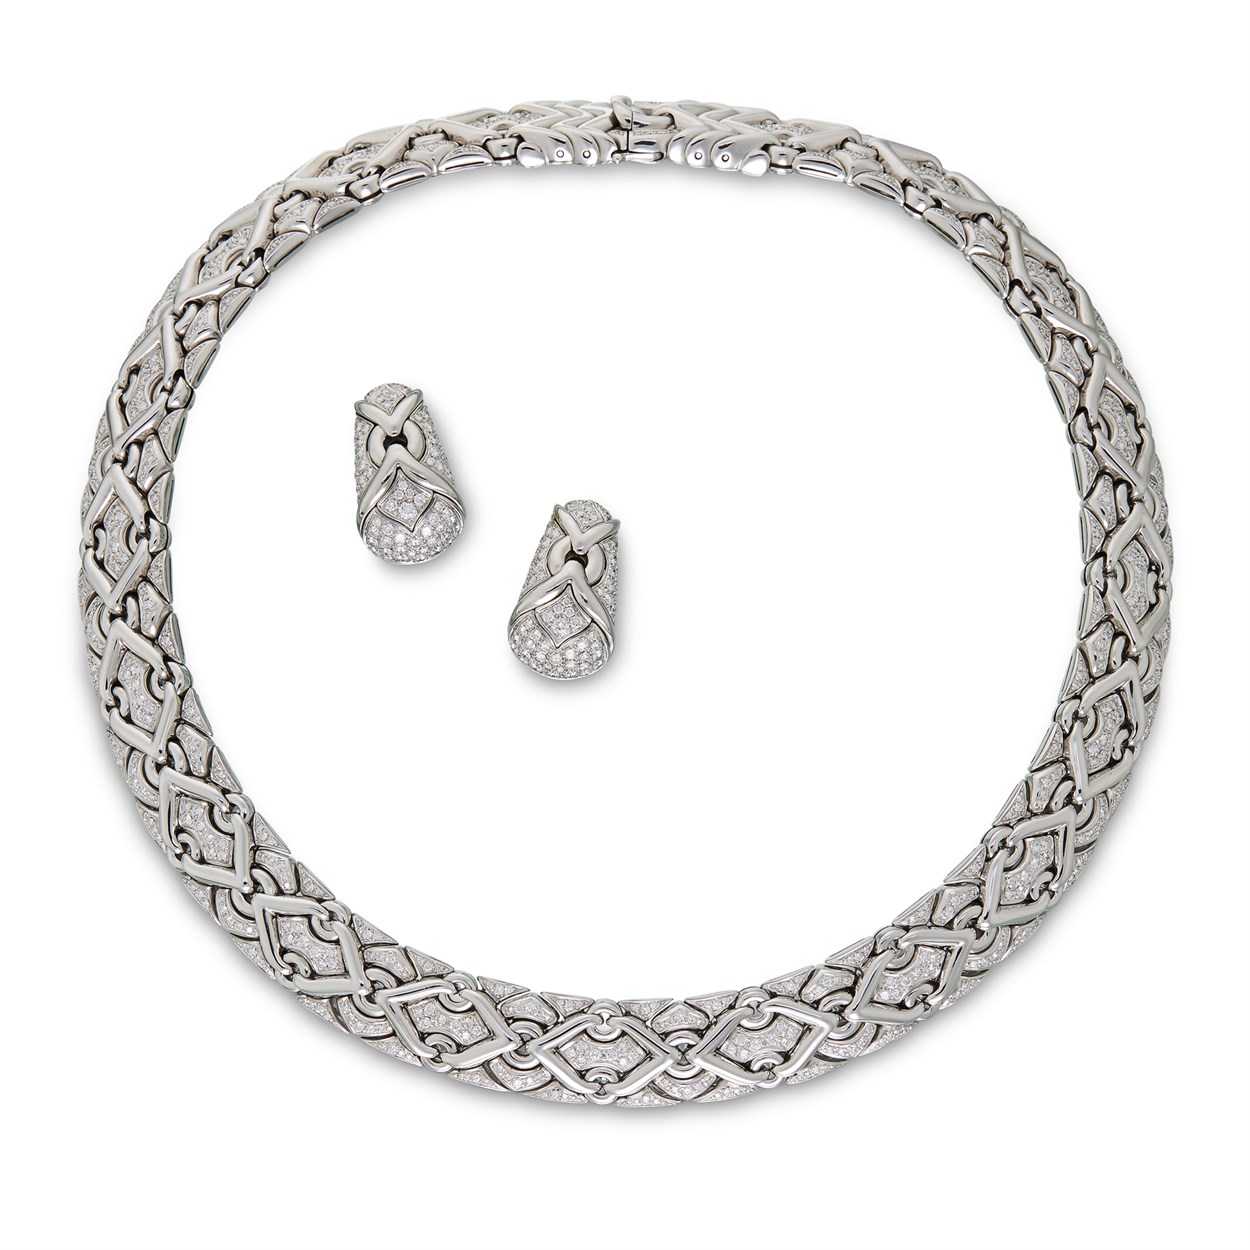 Lot 96 - A diamond and eighteen karat white gold necklace and earrings, Bulgari